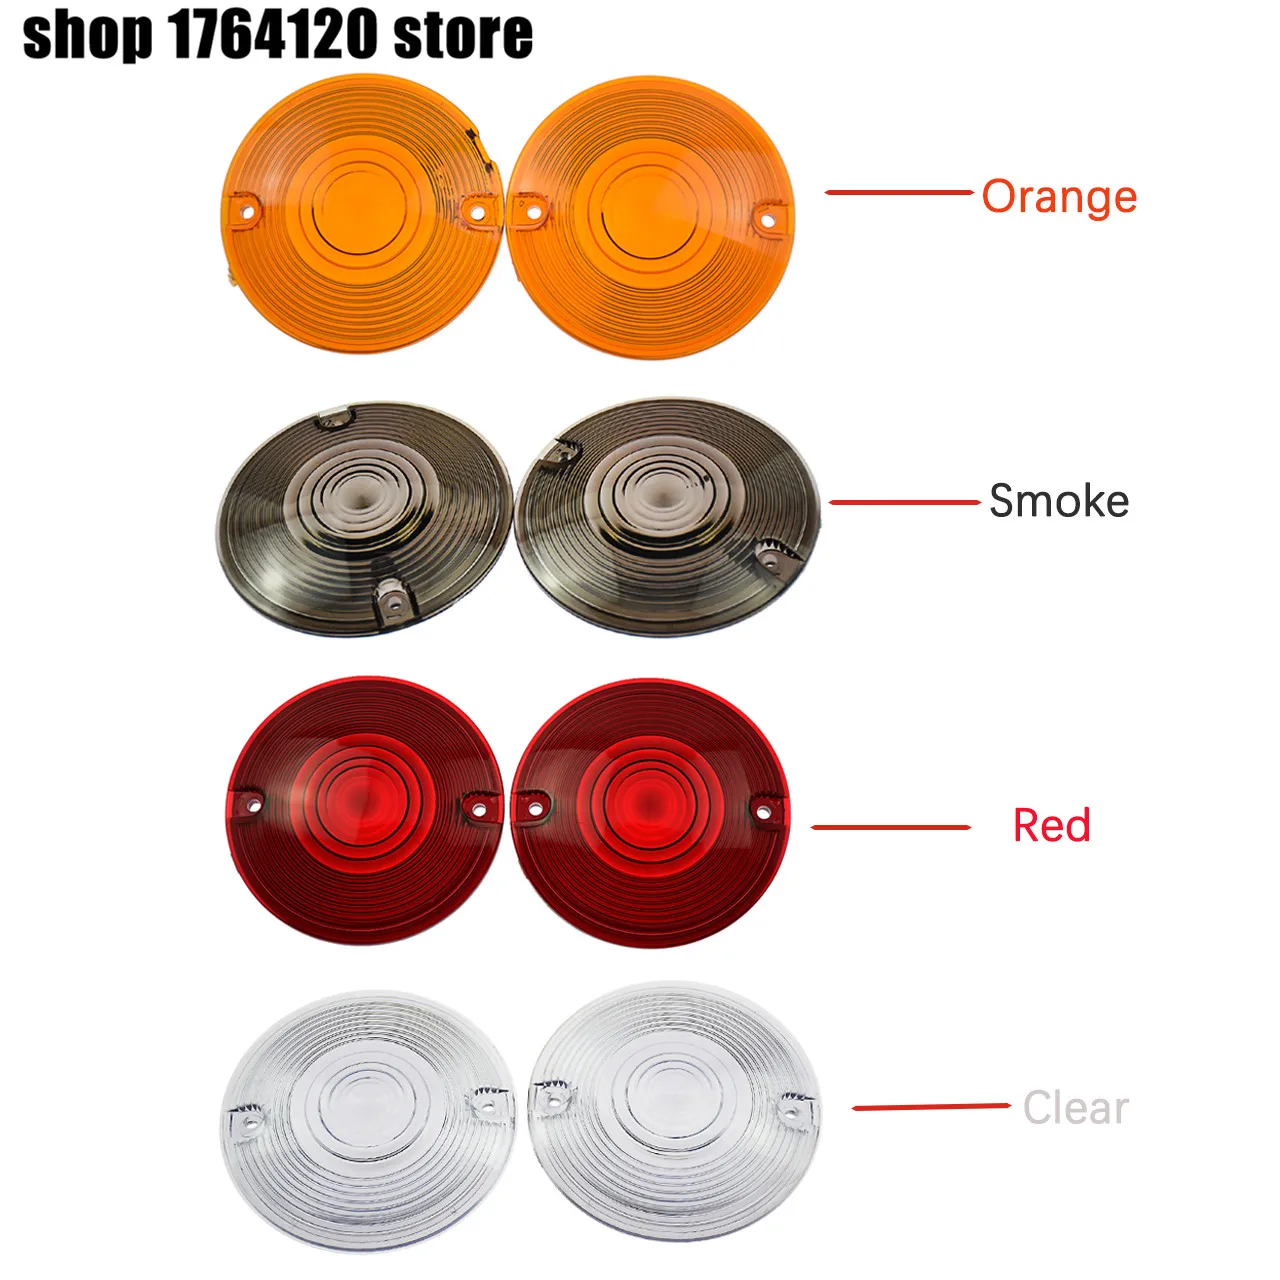 2pcs/4pcs Motorcycle Turn Signal Light Lens Cover For Harley Touring 1986-2014 Electra Glides Road King Ultra Glide Softail